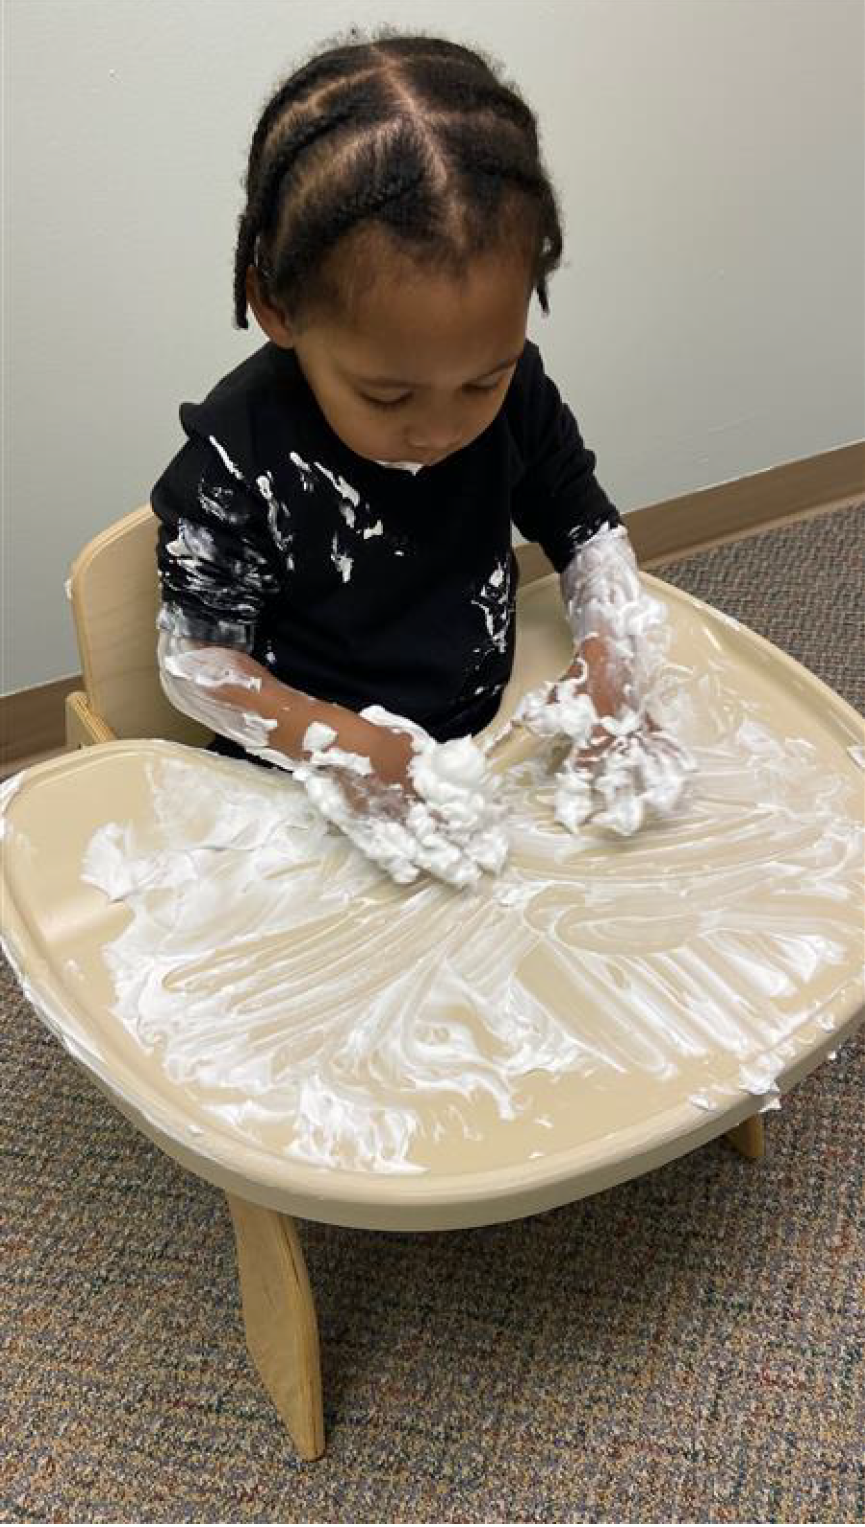 Why You Should Let Your Kids Be Messy